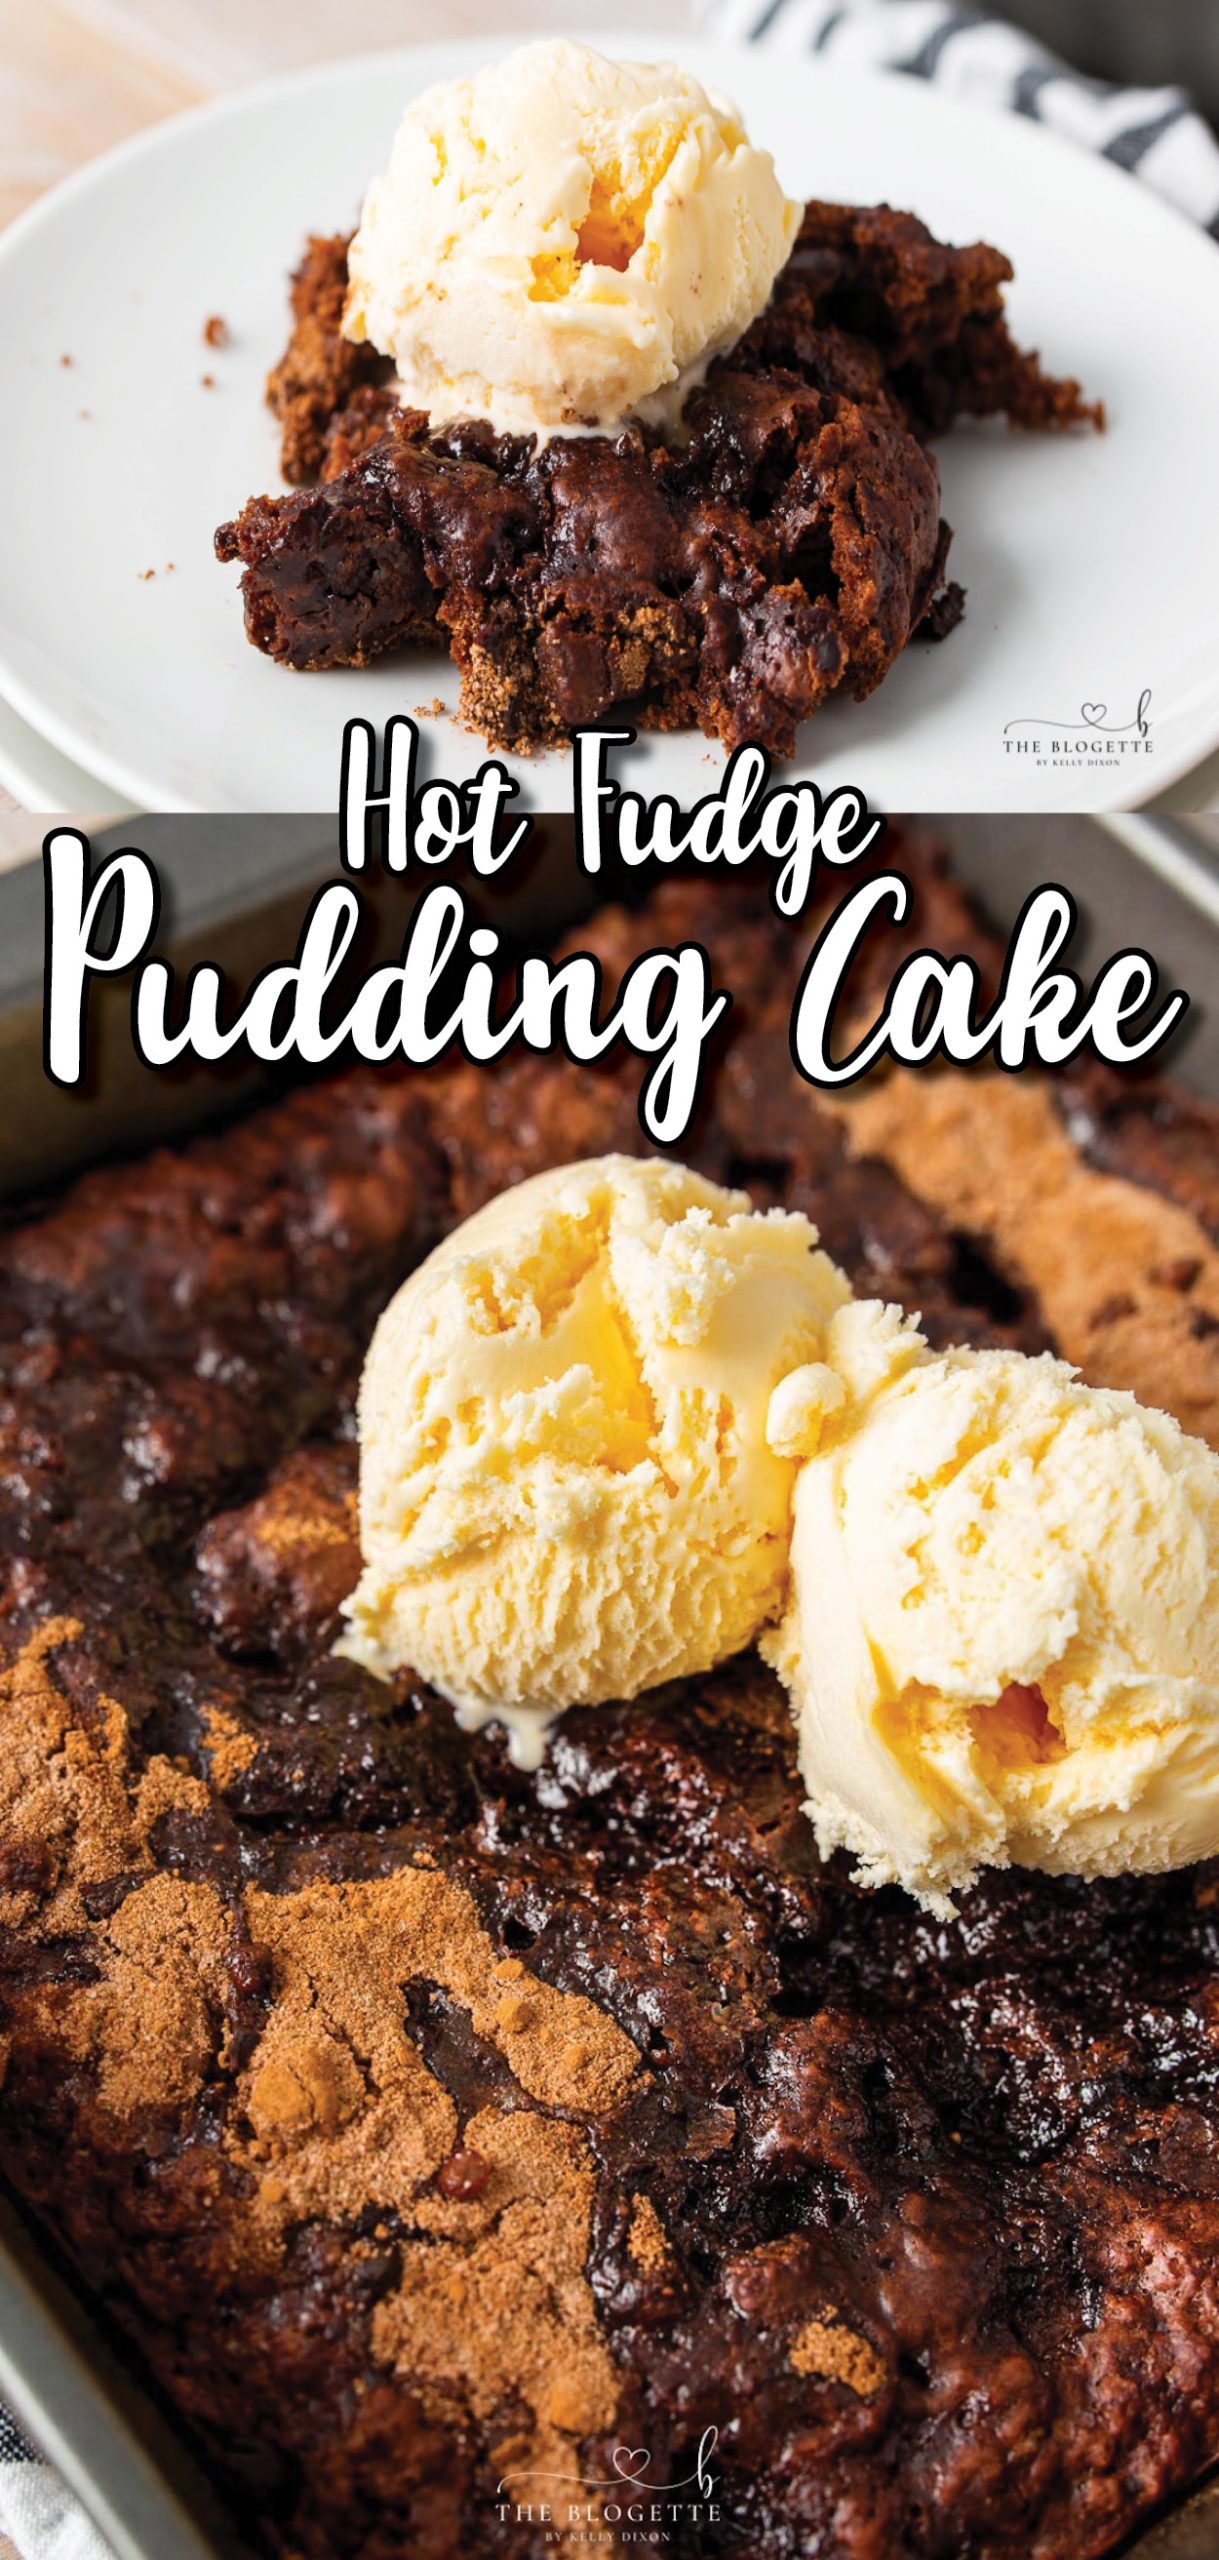 Hot Fudge Pudding Cake is a super simple homemade cake batter that bakes into a beautiful chocolate cake with warm fudge hidden inside.